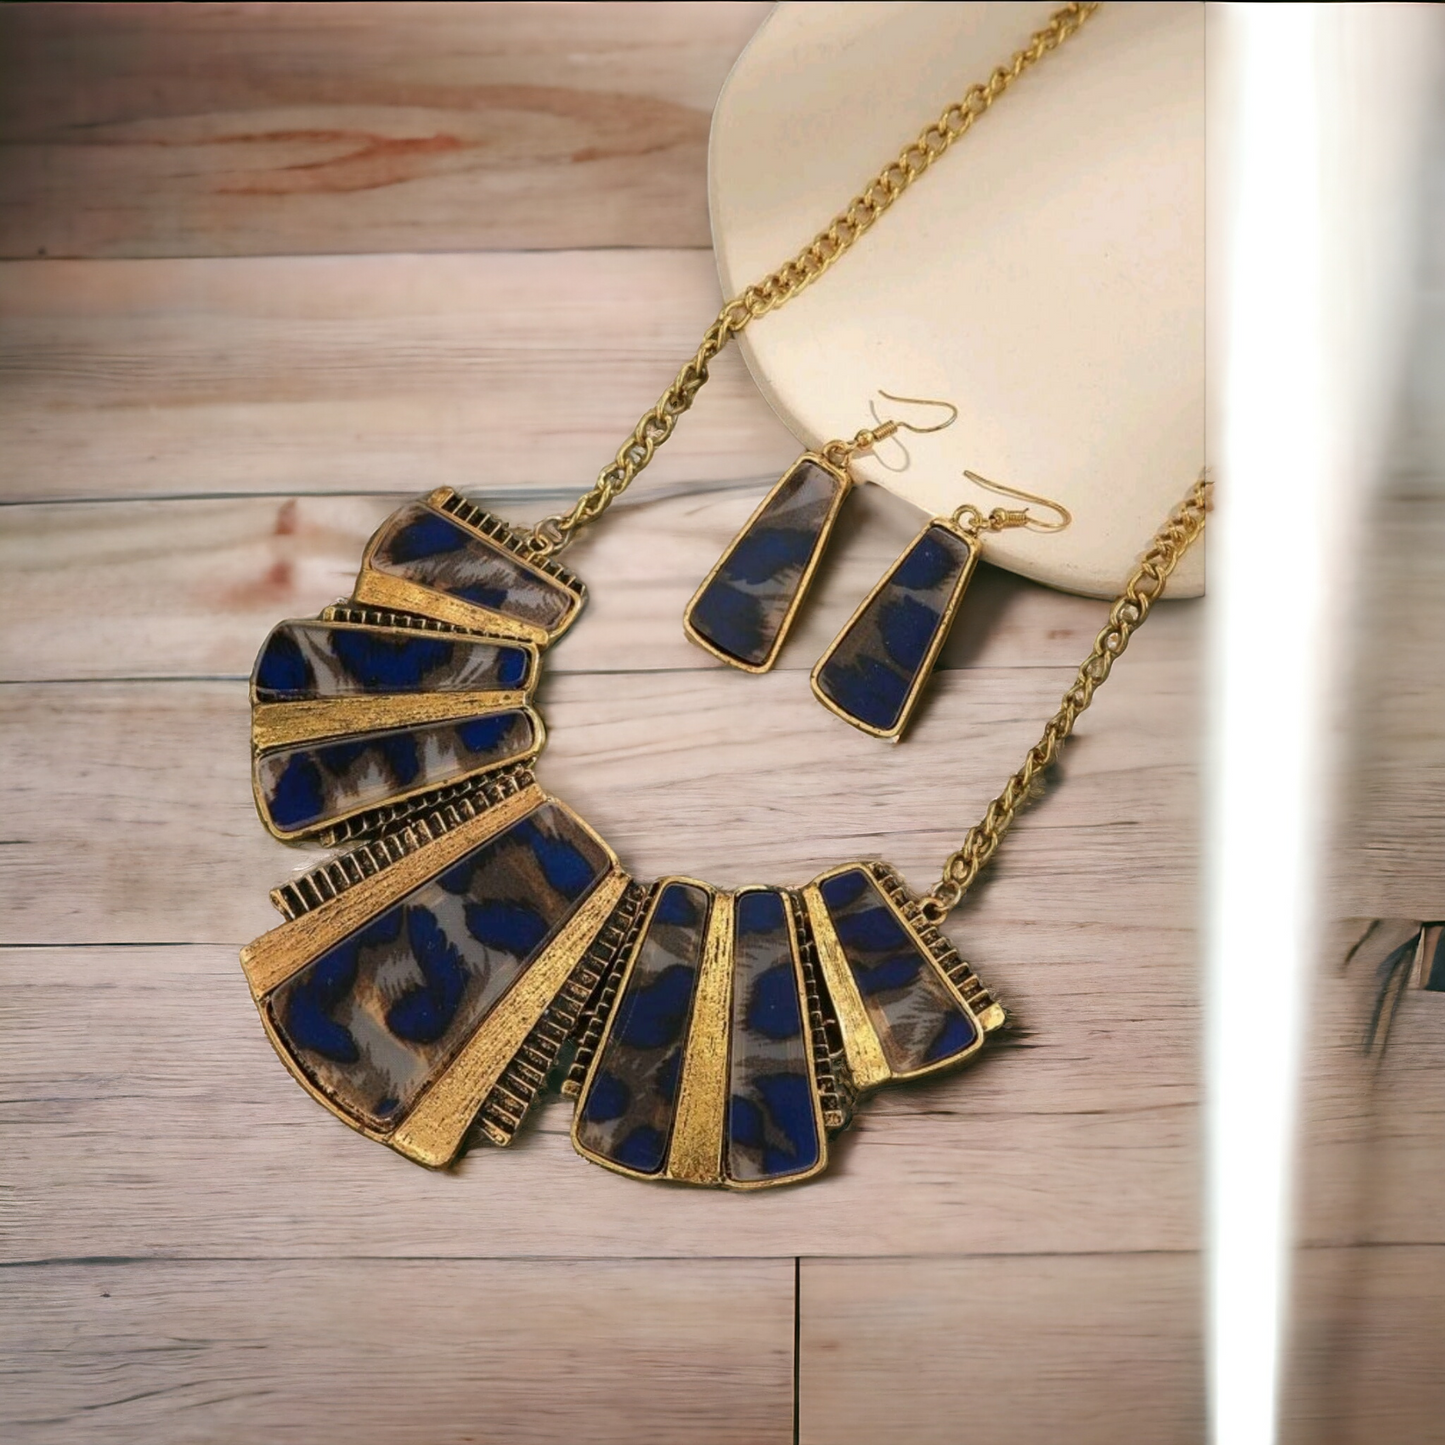 On the prowl necklace set